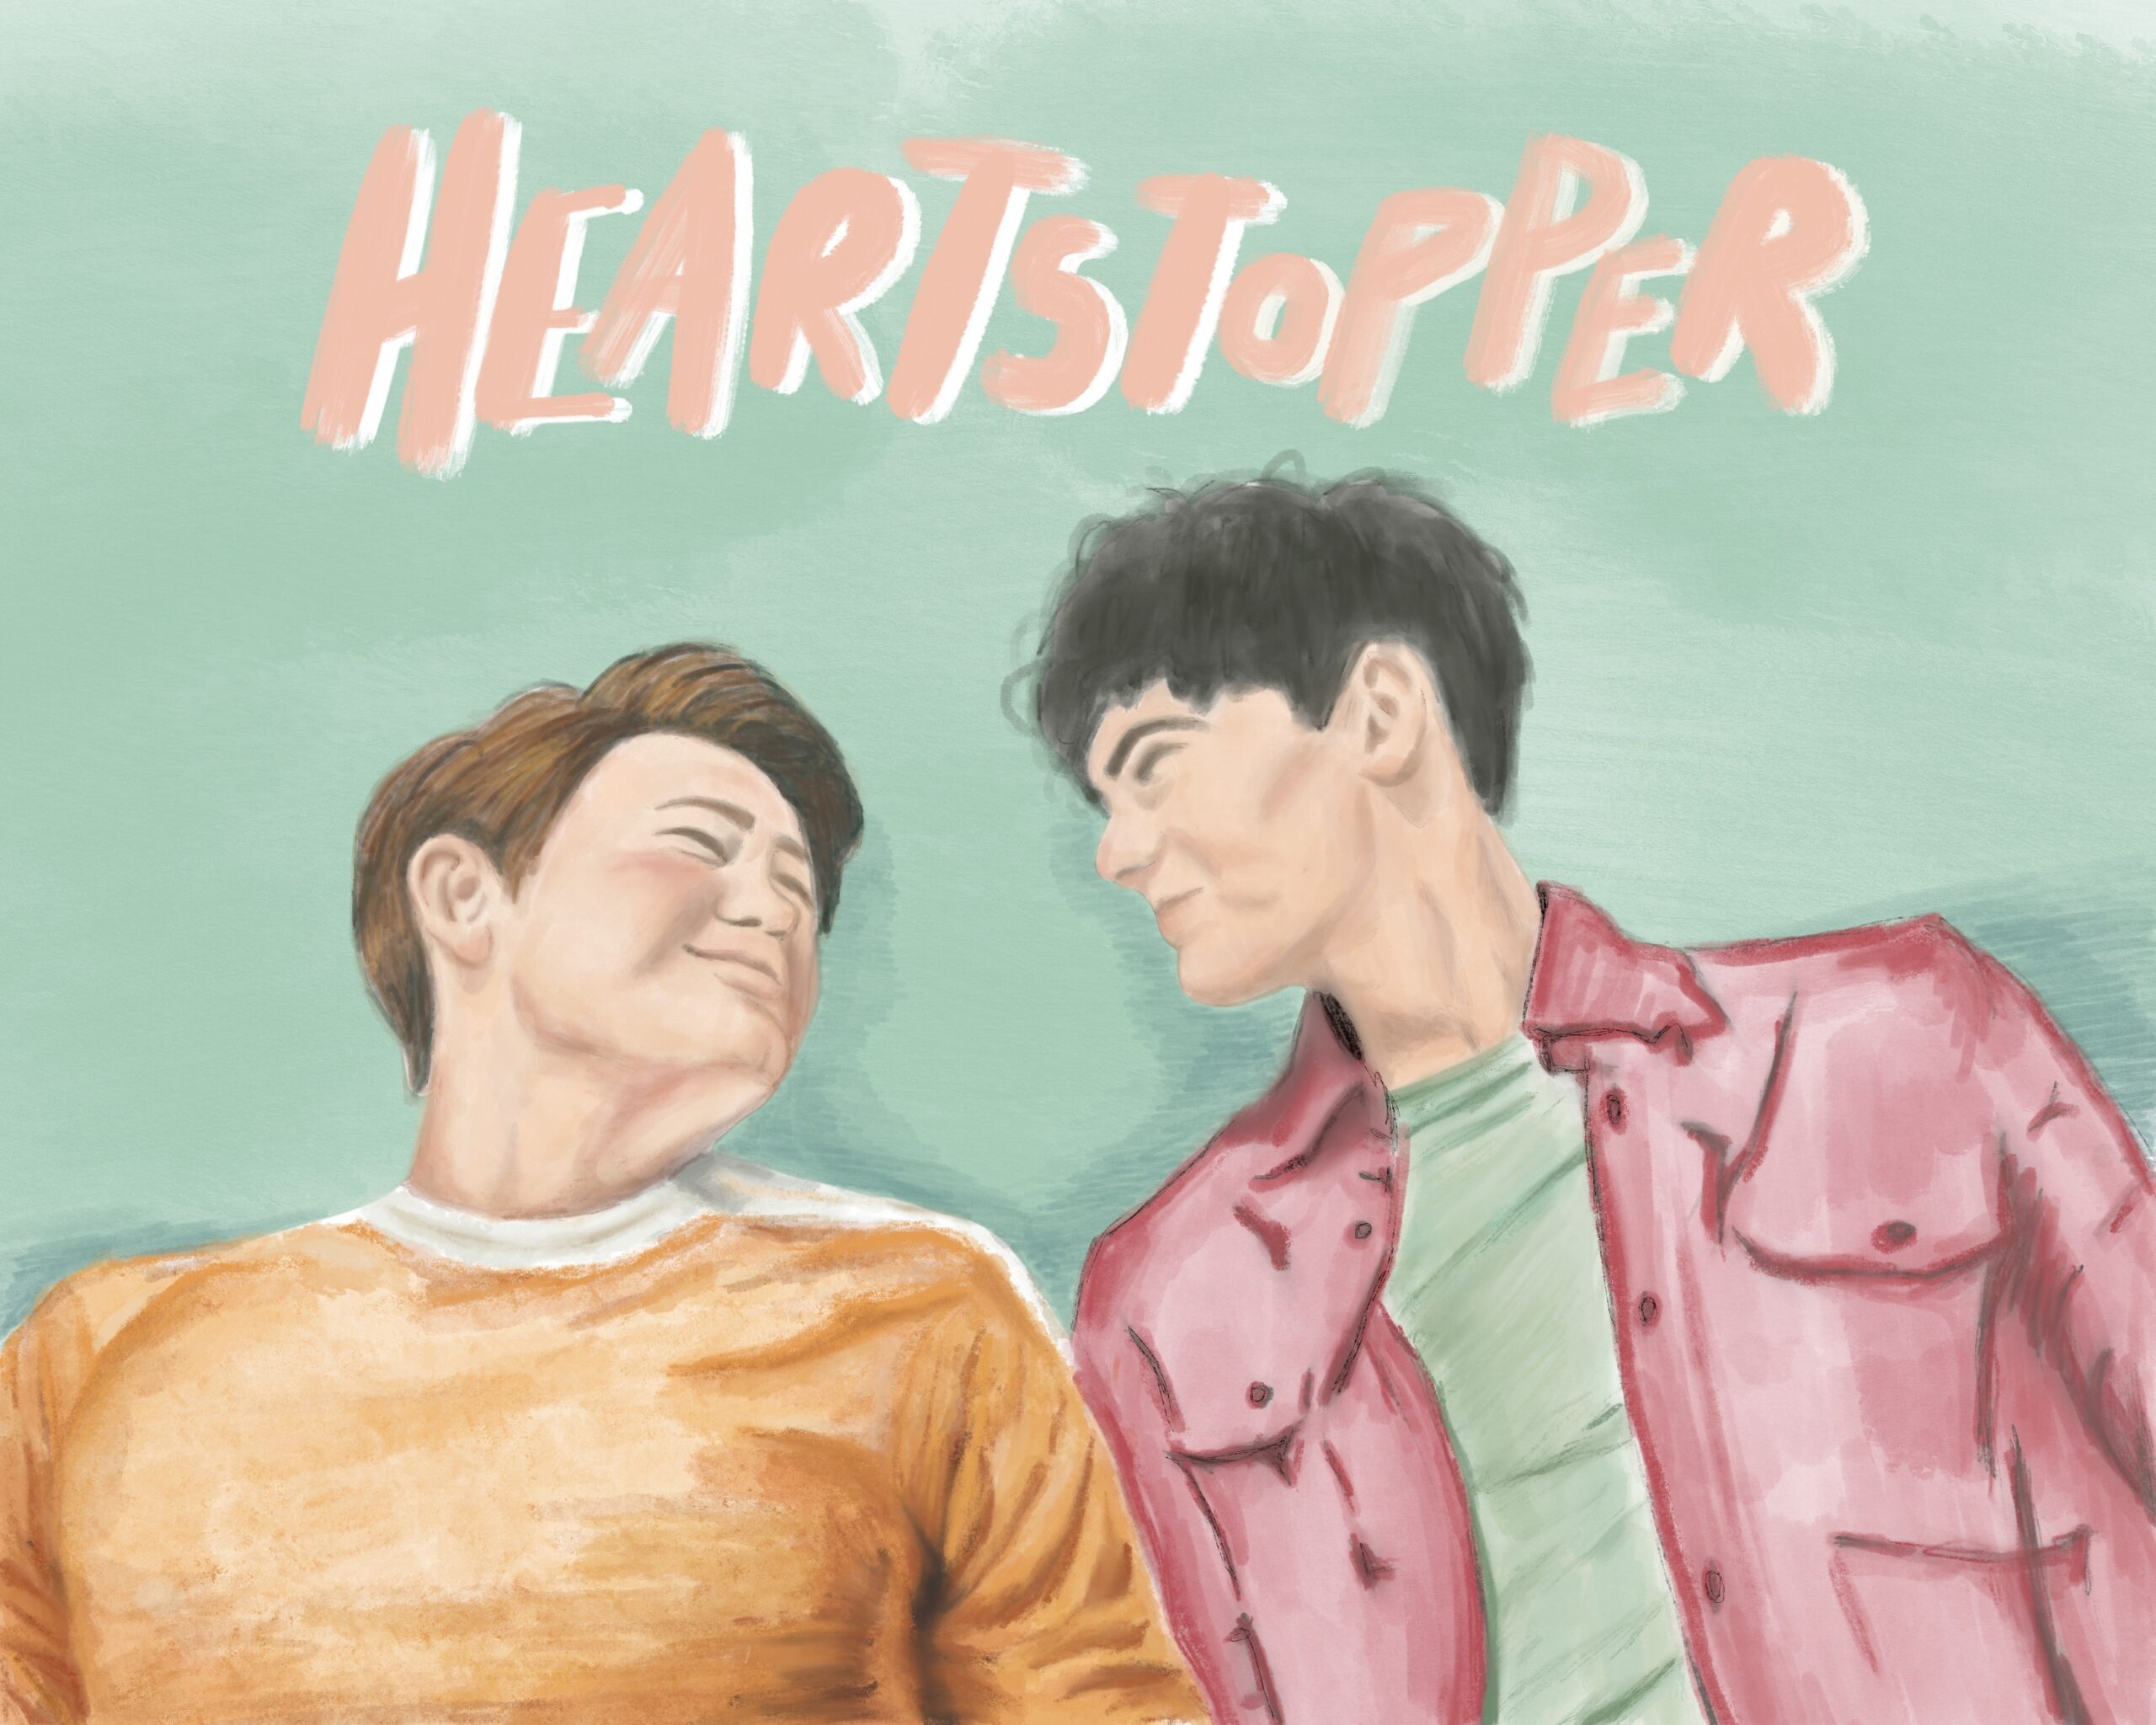 Heartstopper's Biggest Changes from the Graphic Novels to the Screen